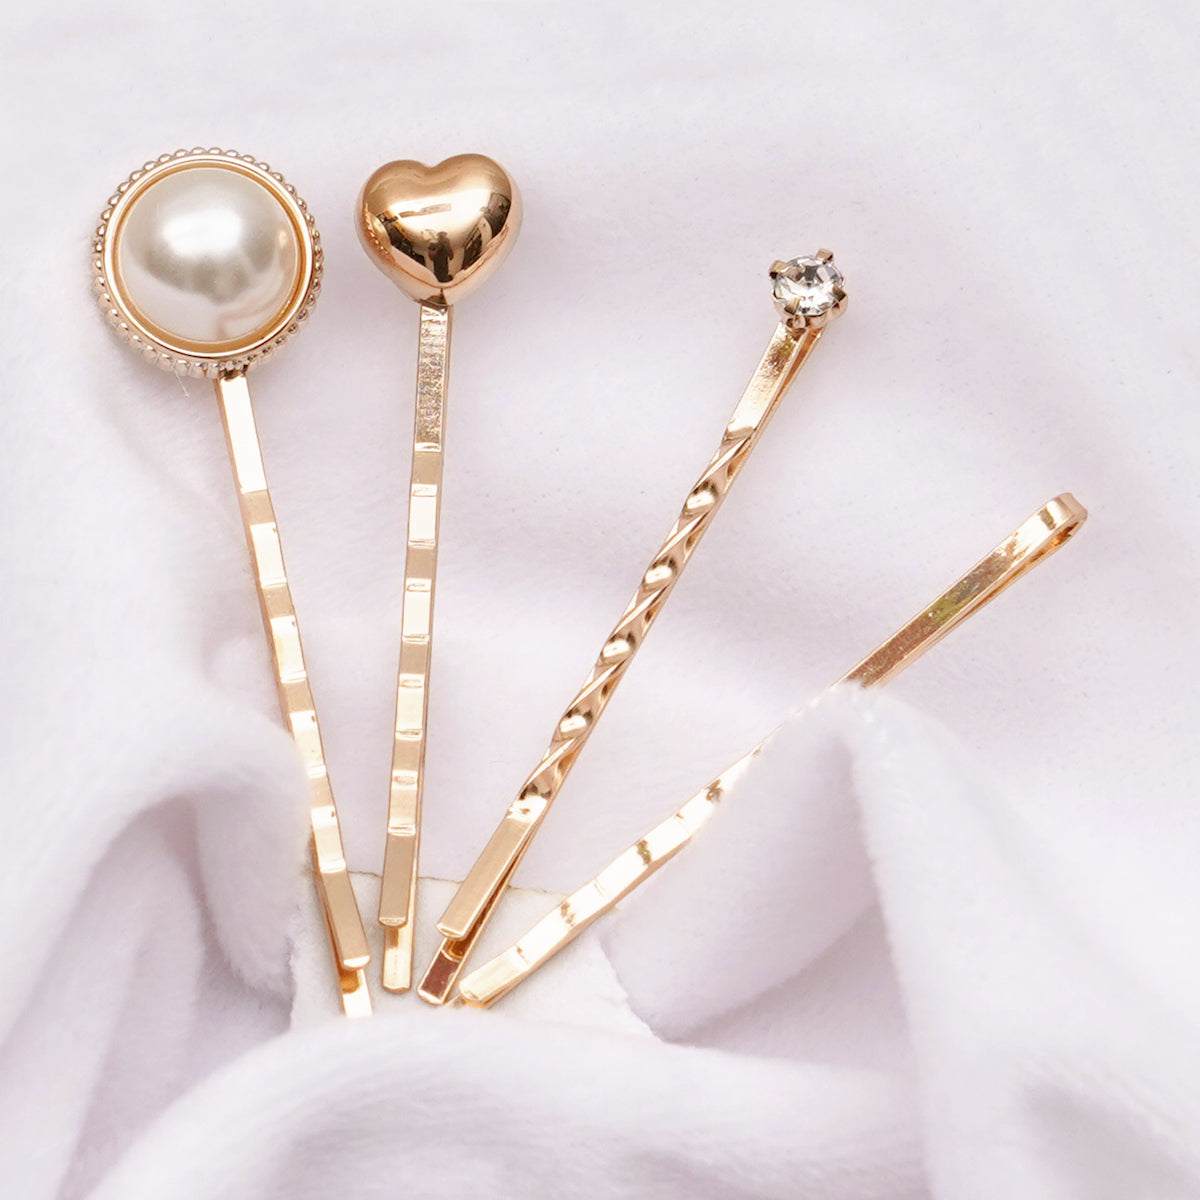 Gold Pearl Love Hairpins - Set of 4